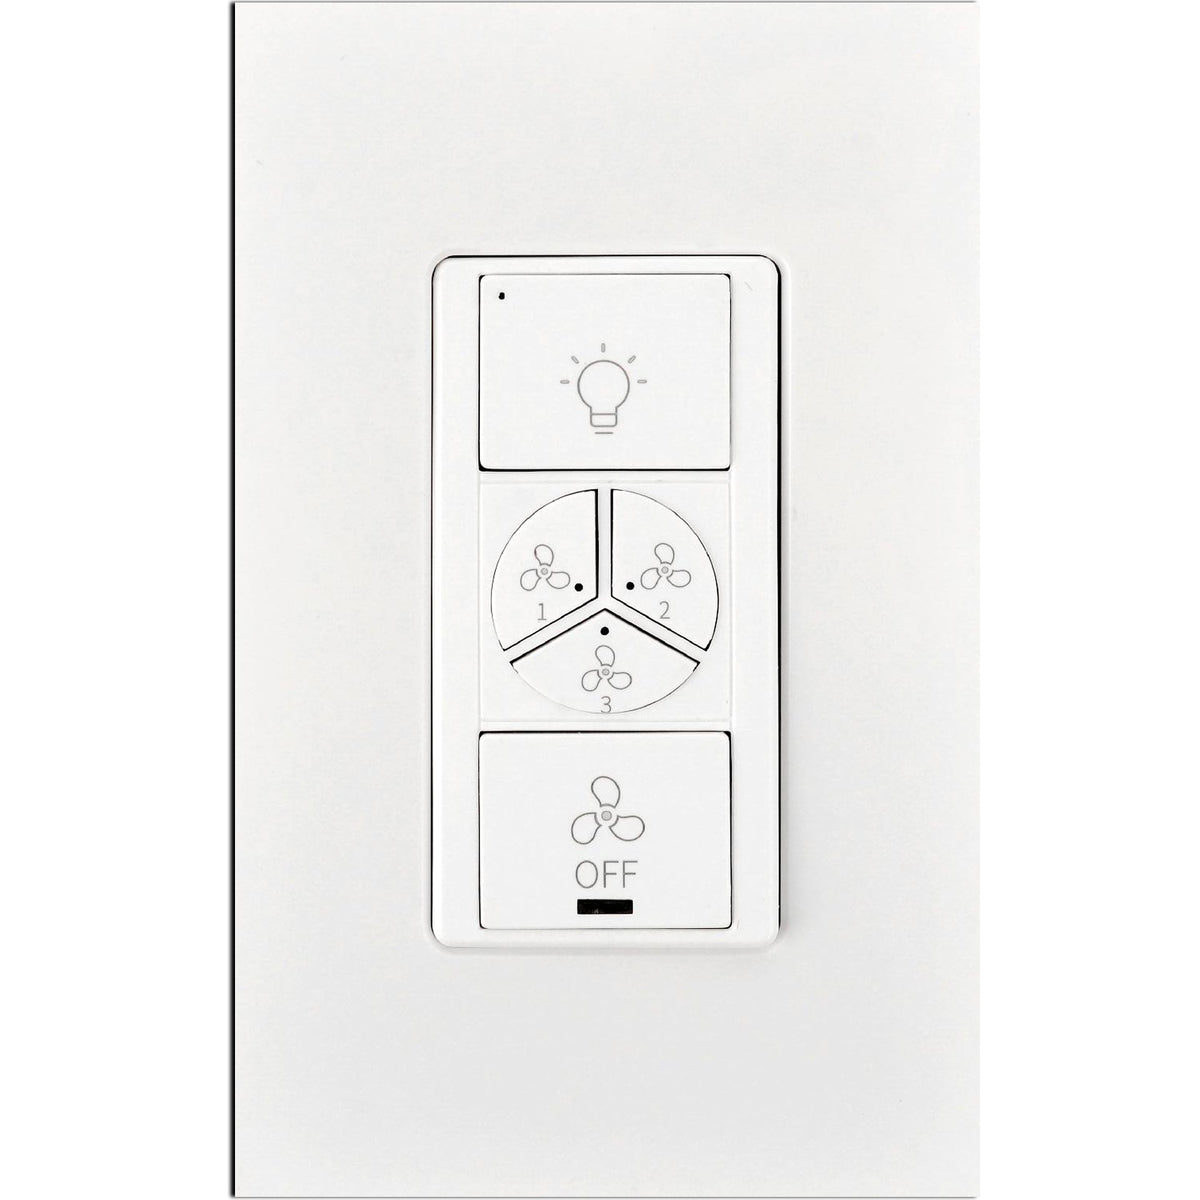 Pilot Best Smart Wall Switch For Ceiling Fans(1-Gang), Google Assistant, and Siri Shortcuts, Works with Amazon Alexa